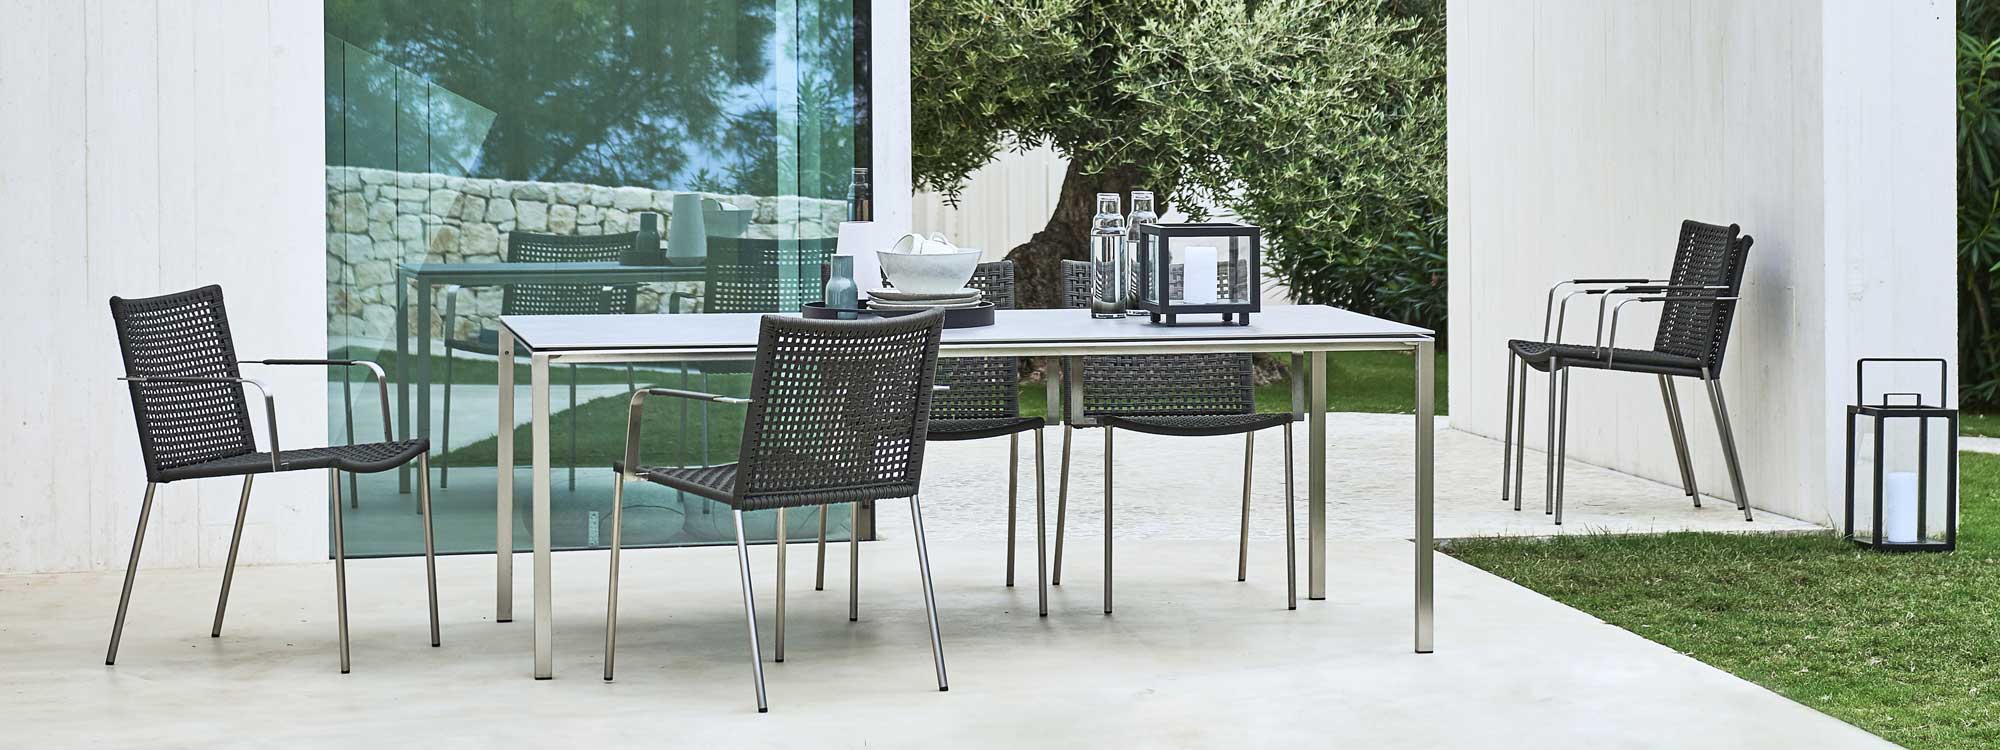 Image of Straw stainless steel chairs and Pure dining table by Caneline, shown on sleek modern terrace